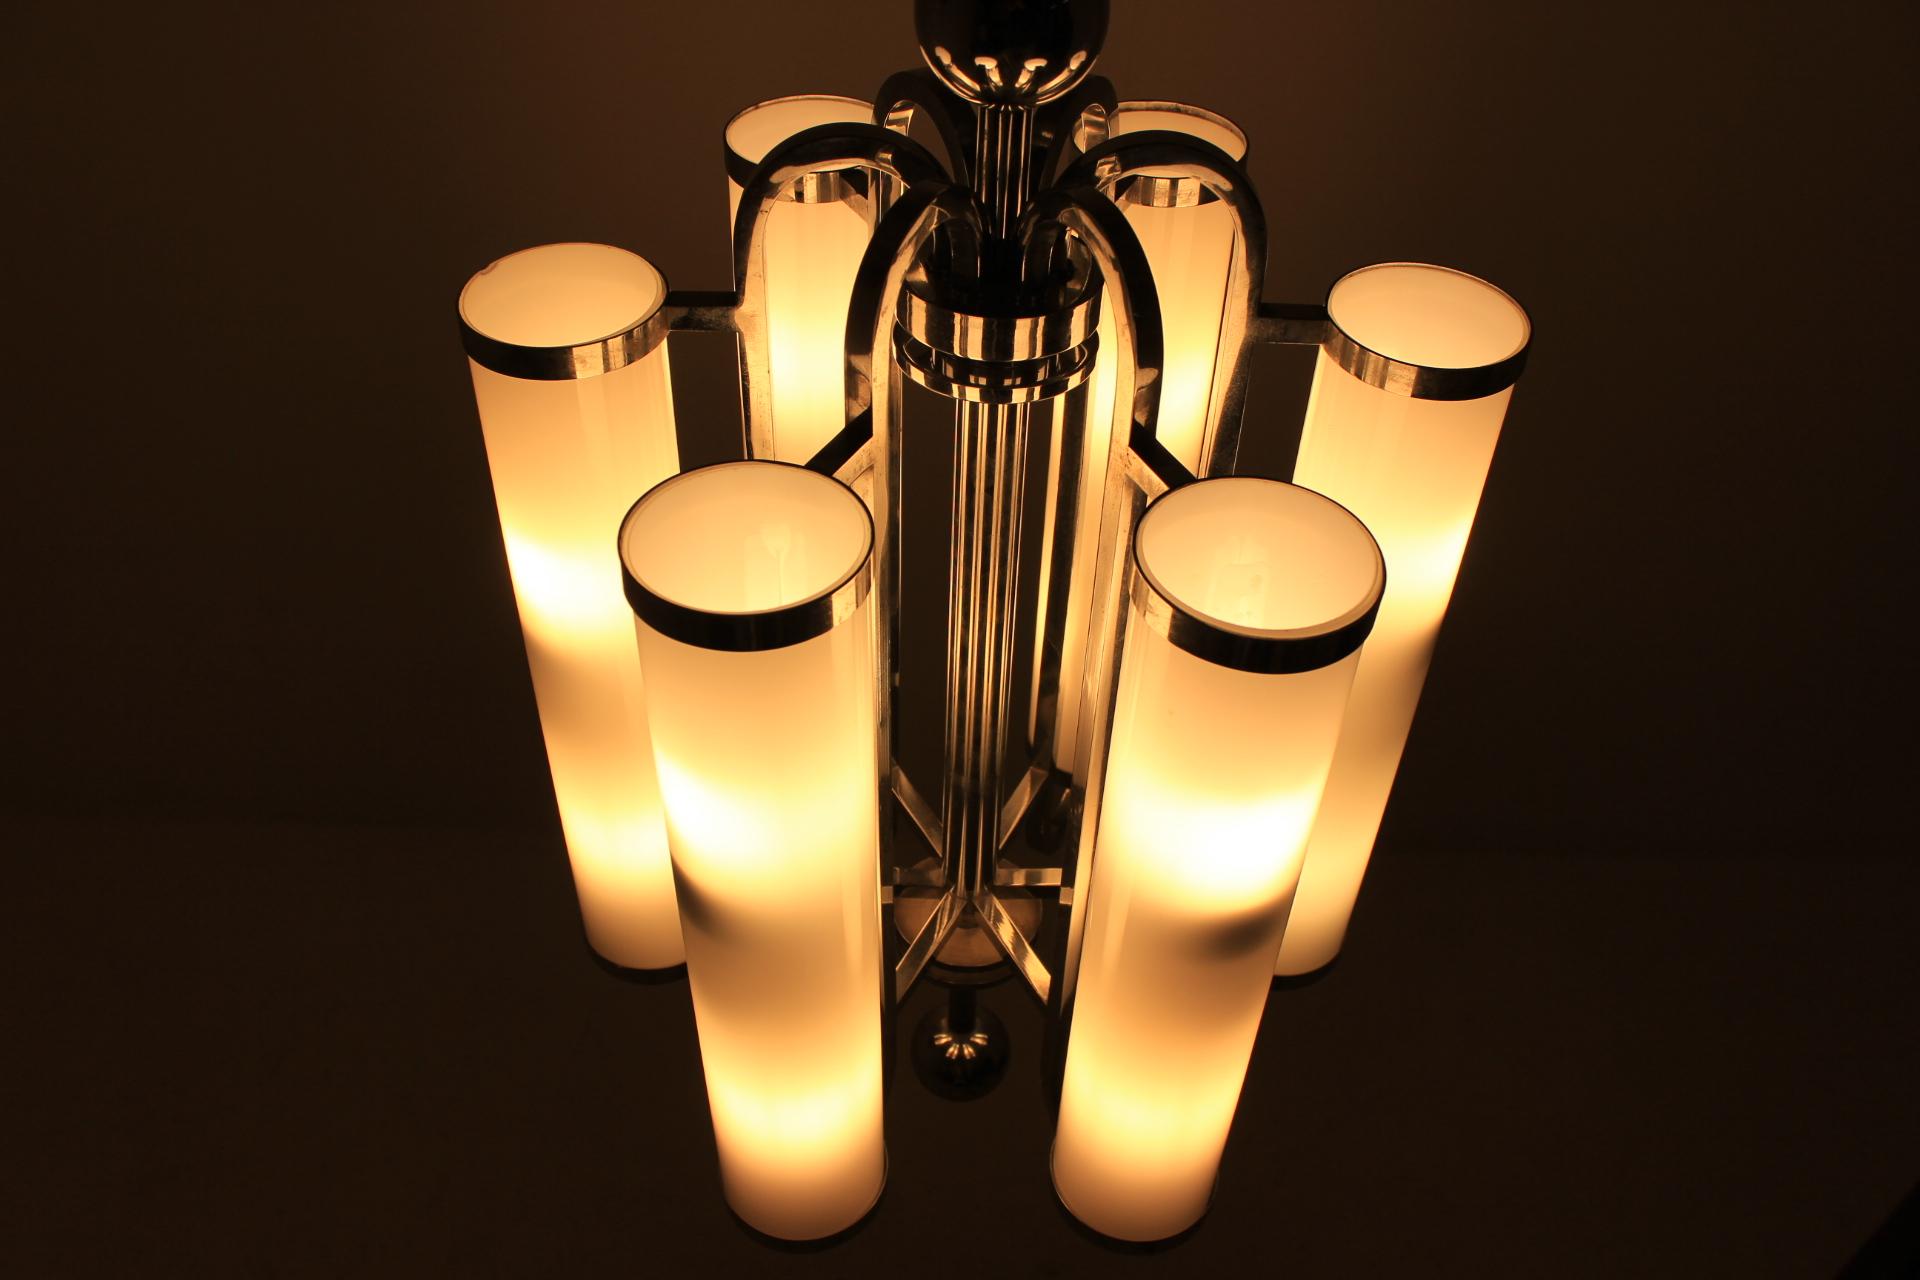 - 1930s
- one tube with tiny hair rupture (not seen)
- original electricity
- chrome with patina (perfect condition)
- original opaline glass tubes
- 12 bulbs.